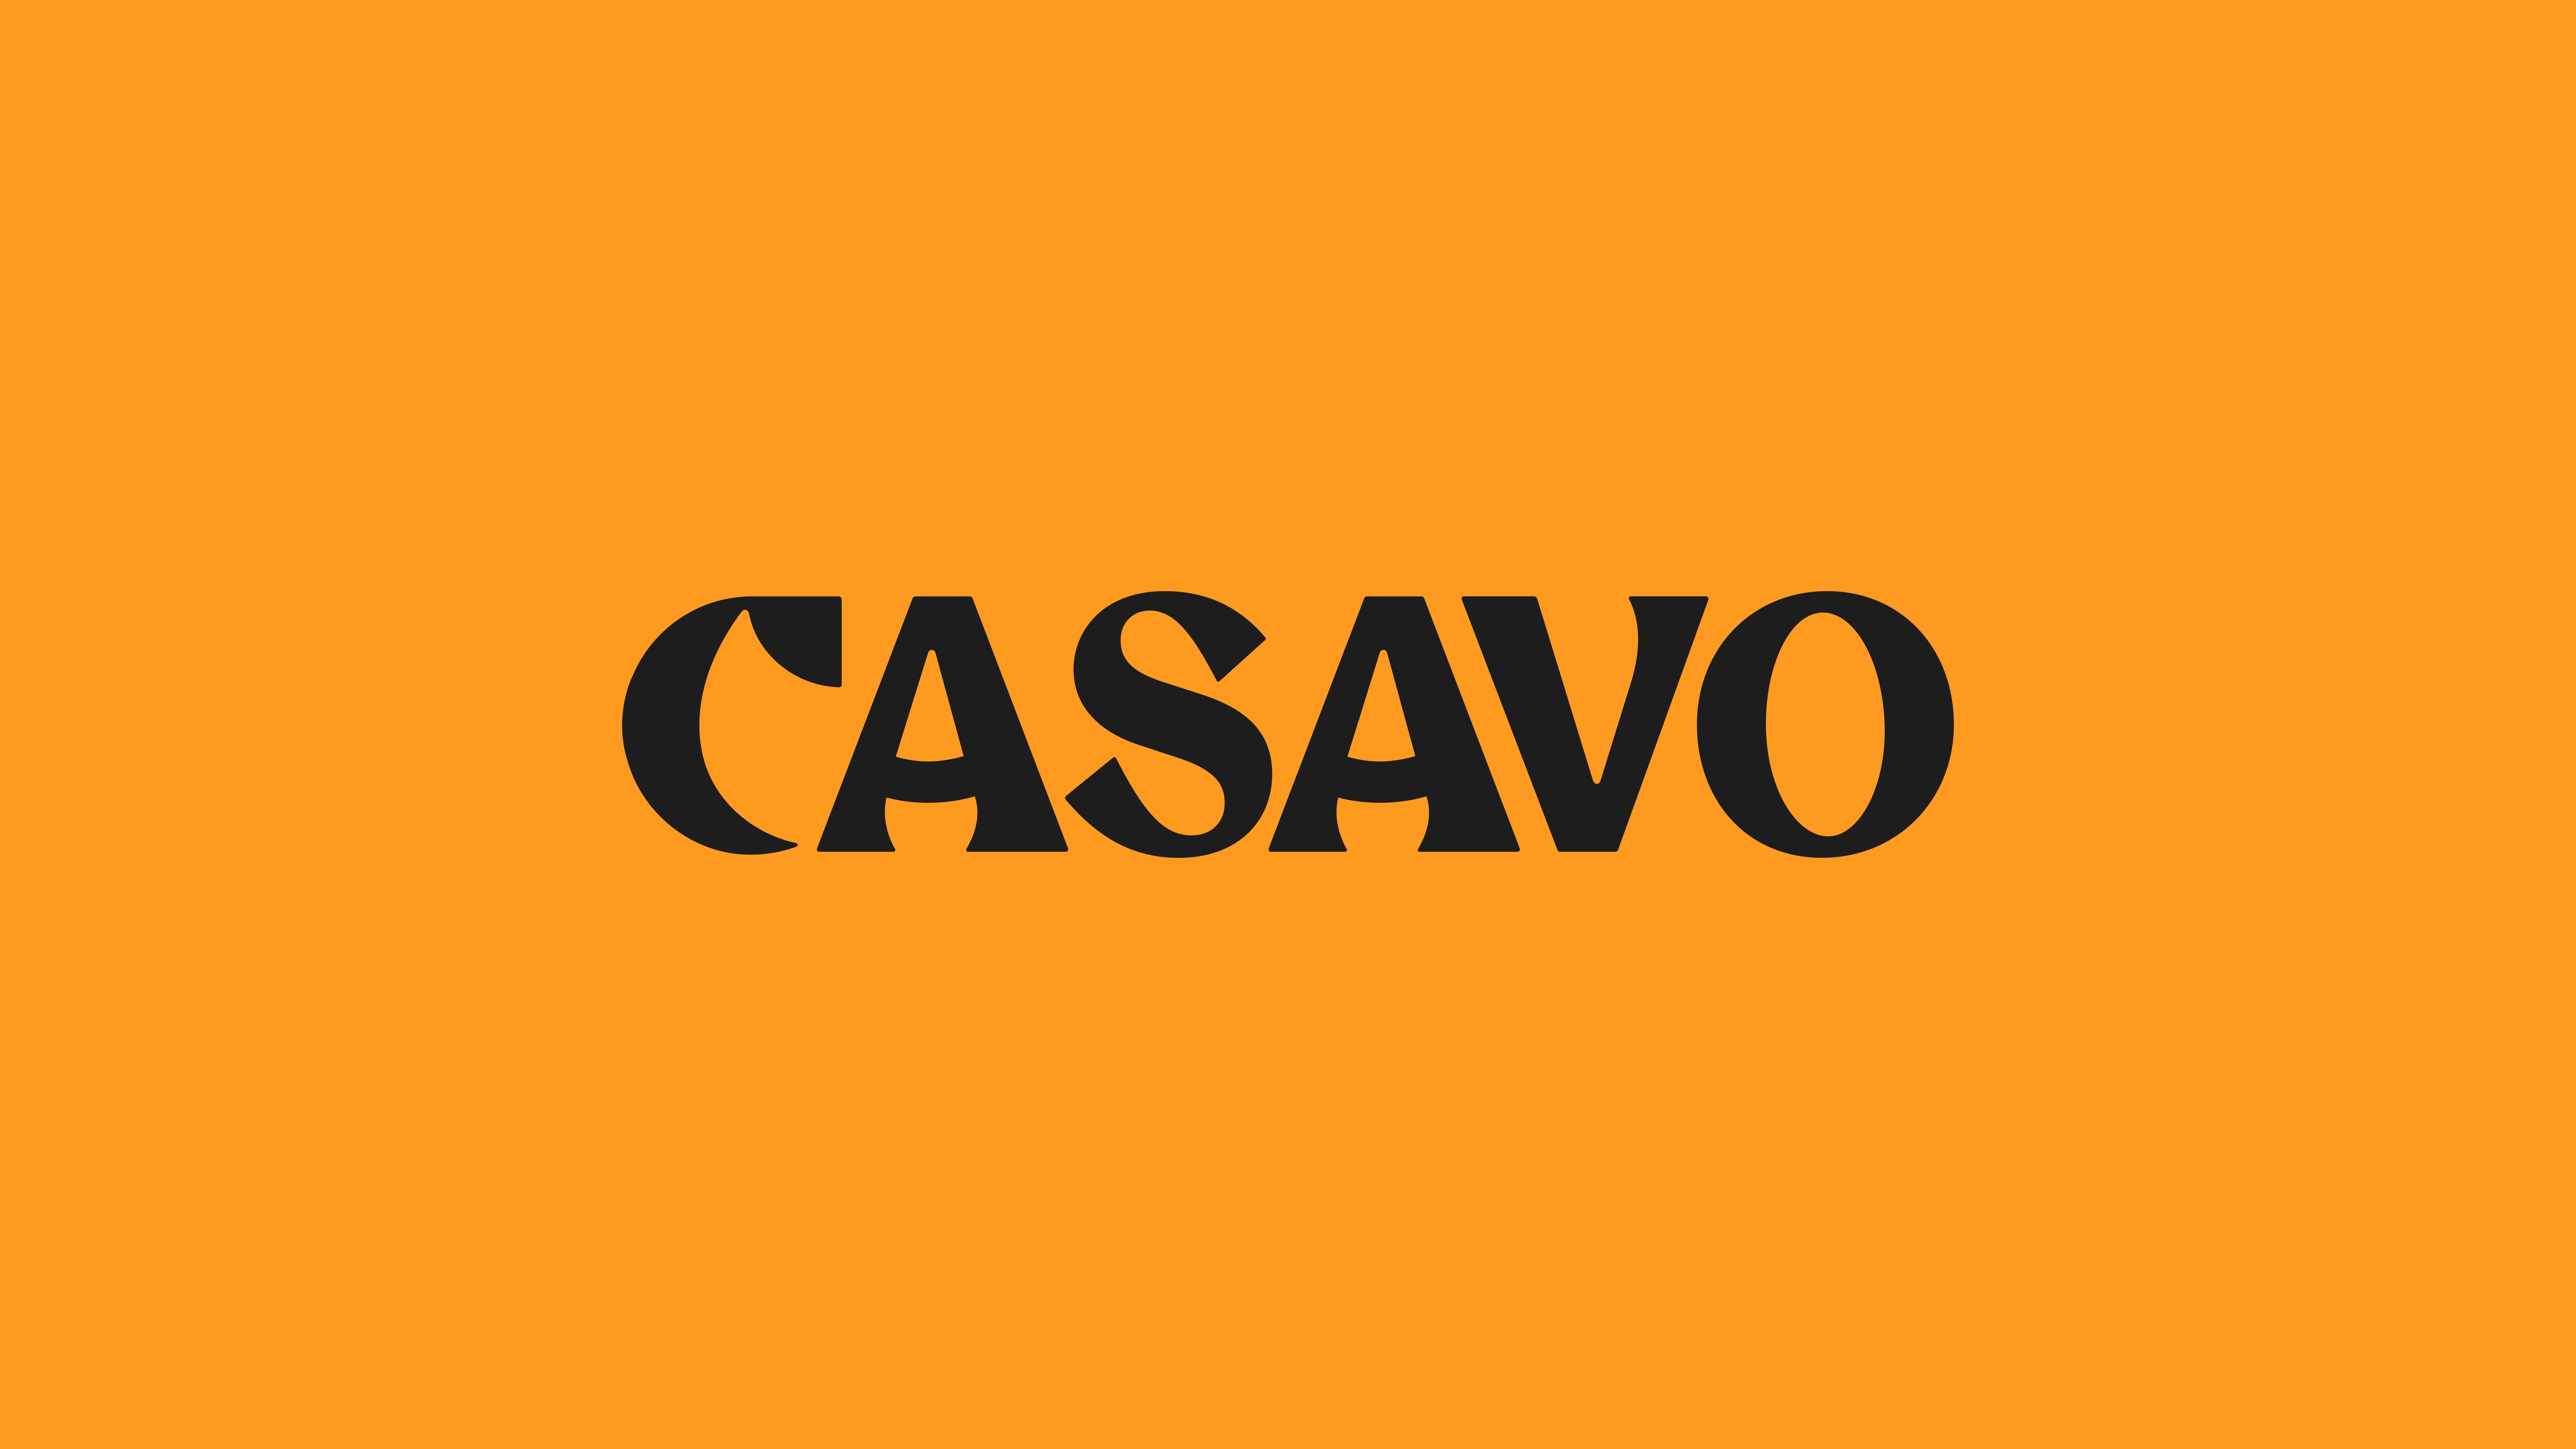 A difficult decision to strengthen Casavo’s foundations for the future